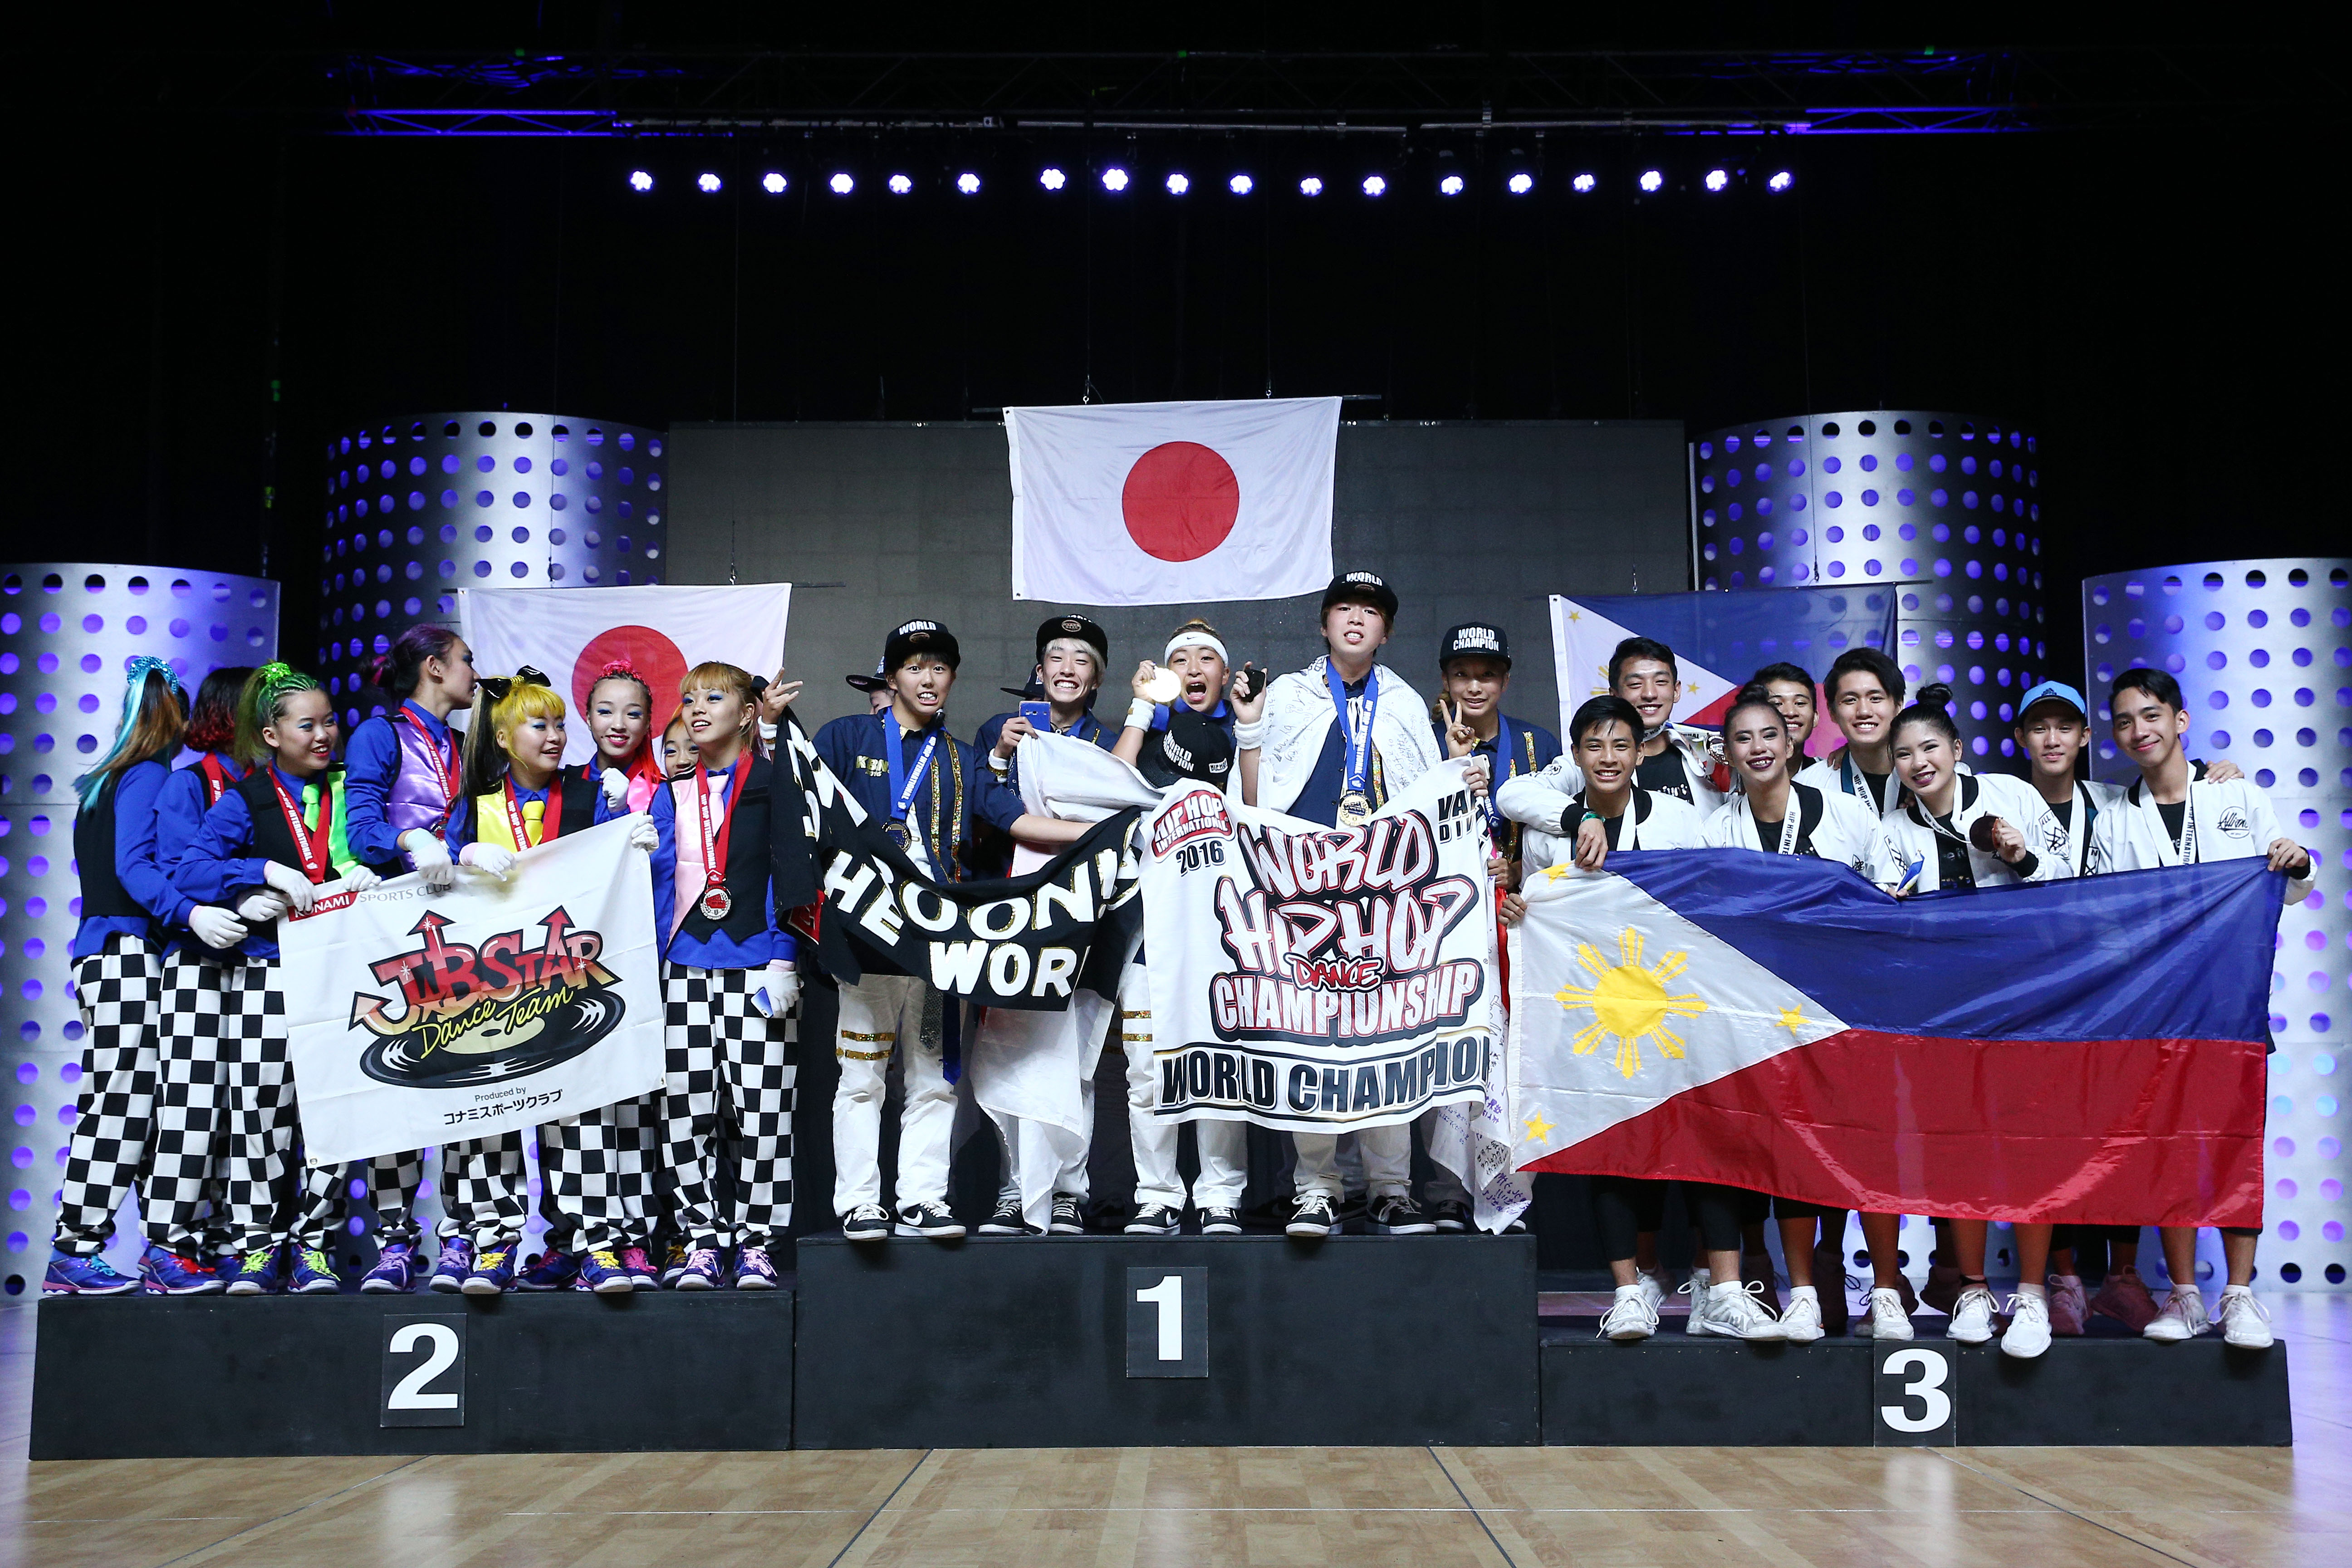 Hip-hop dance crews from Japan and New Zealand repeat as world champions